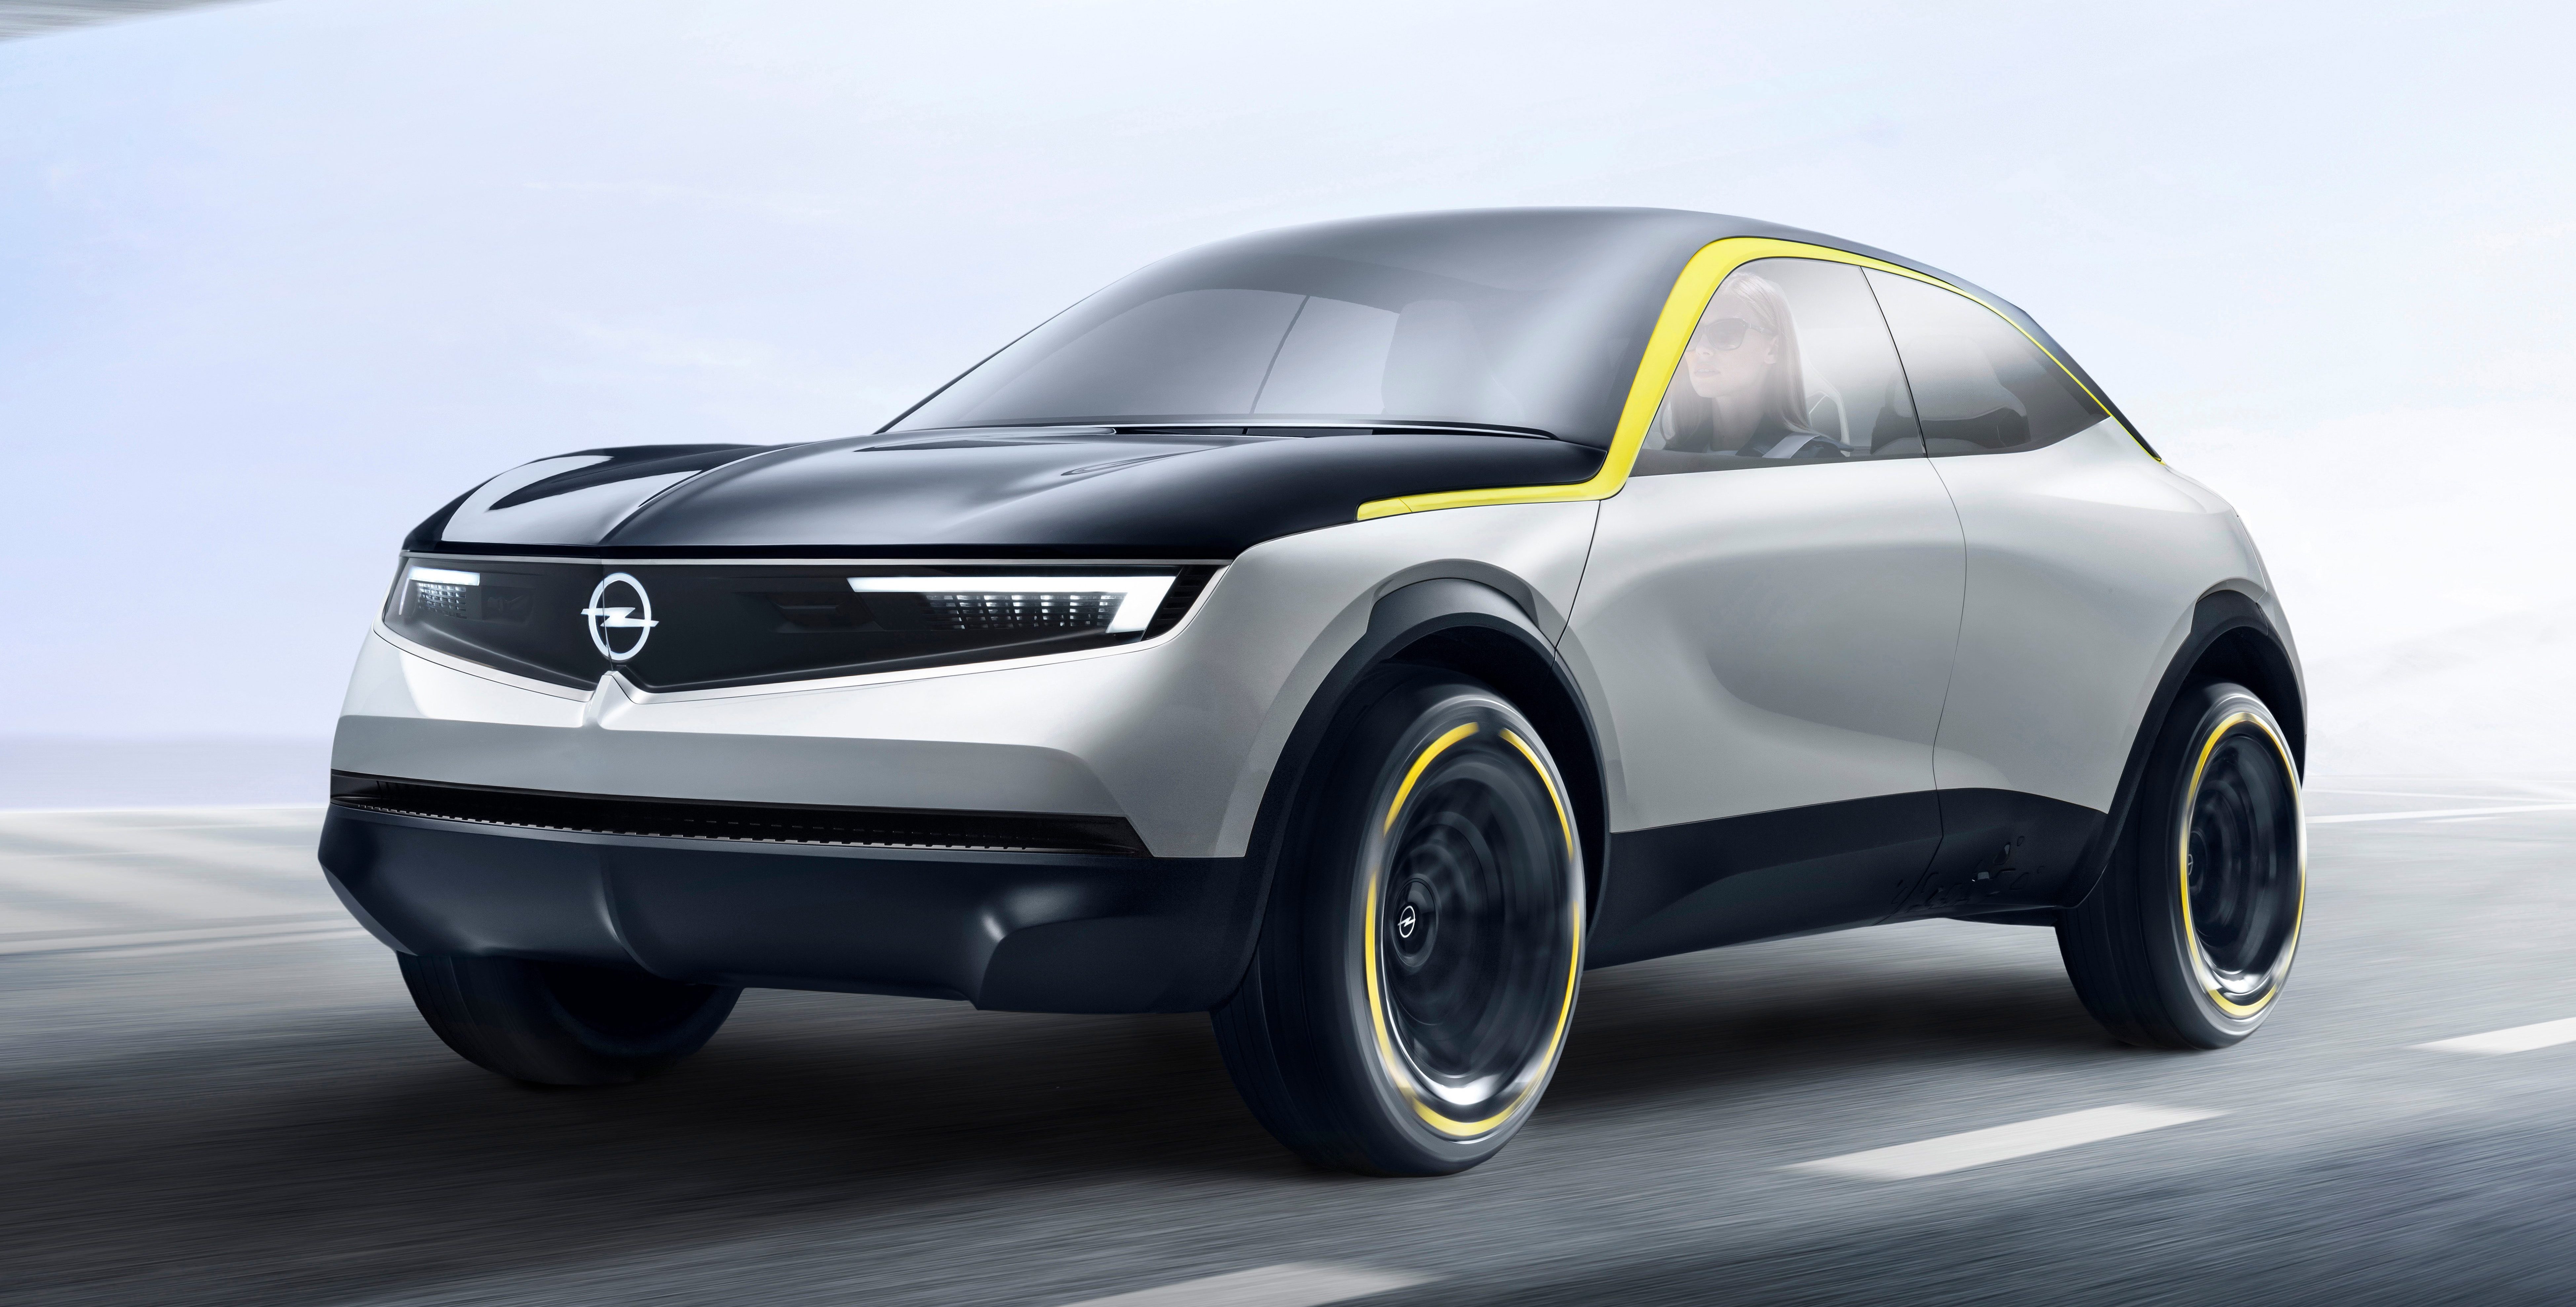 Opel unveils new stunning all-electric concept